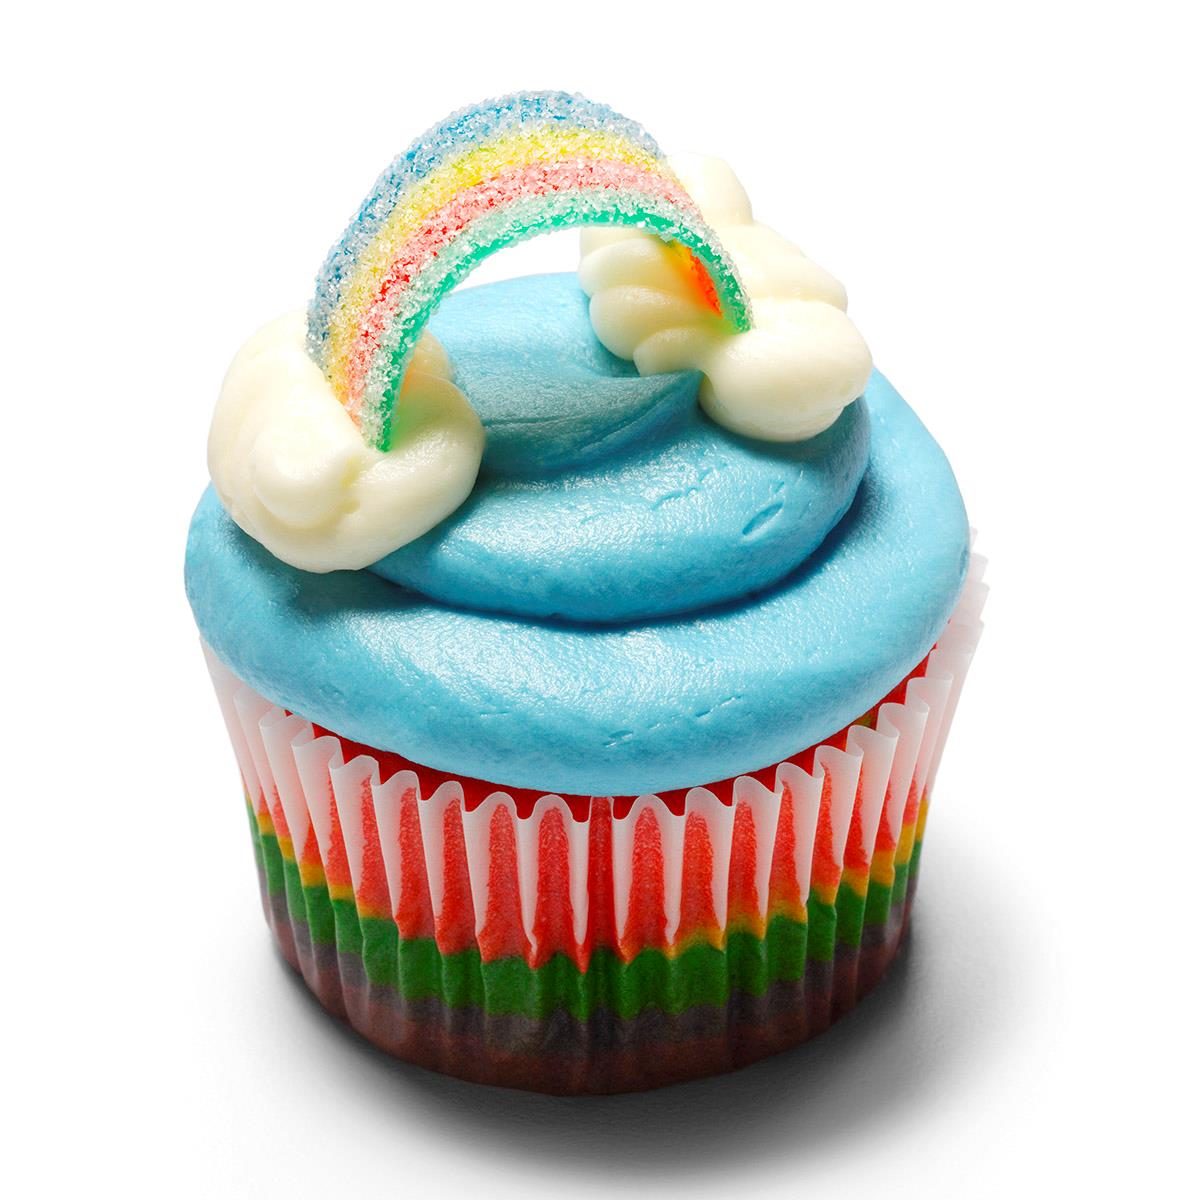 <p>Take a trip back to the '60s with these sweetly psychedelic cupcakes. Each is a simple white cake, but tinting the batter all the colors of the rainbow makes them funky and fun!— Gwyndolyn Wilkerson, Kyle, Texas</p> <div class="listicle-page__buttons"> <div class="listicle-page__cta-button"><a href='https://www.tasteofhome.com/recipes/tie-dyed-cupcakes/'>Go to Recipe</a></div> </div>